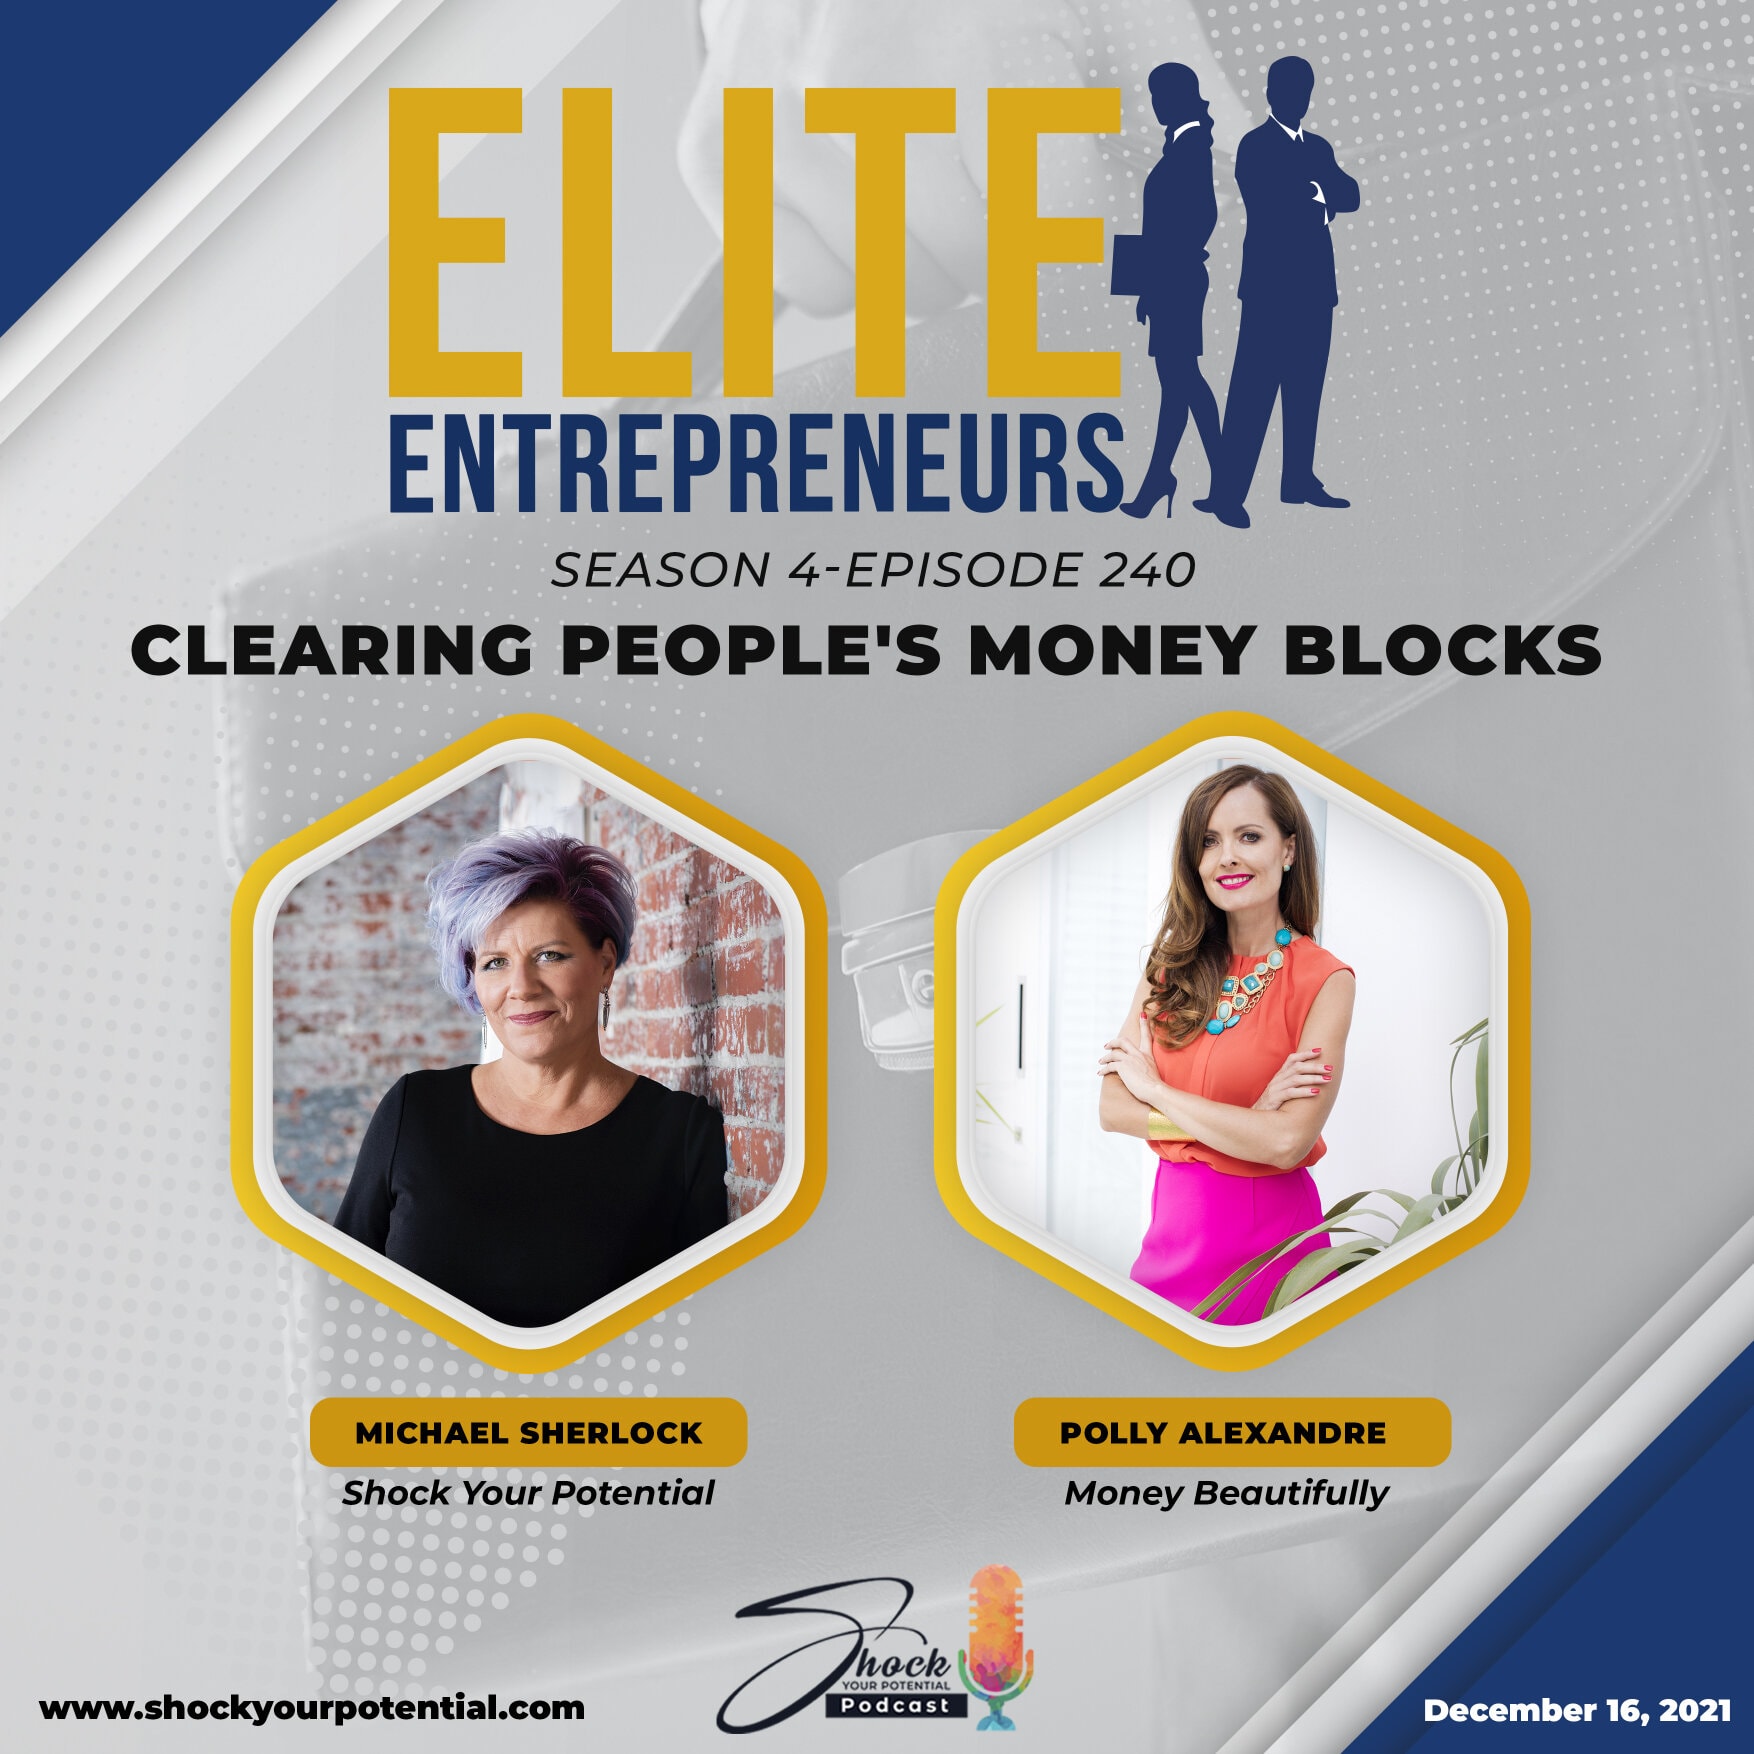 Clearing People‘s Money Blocks – Polly Alexandre